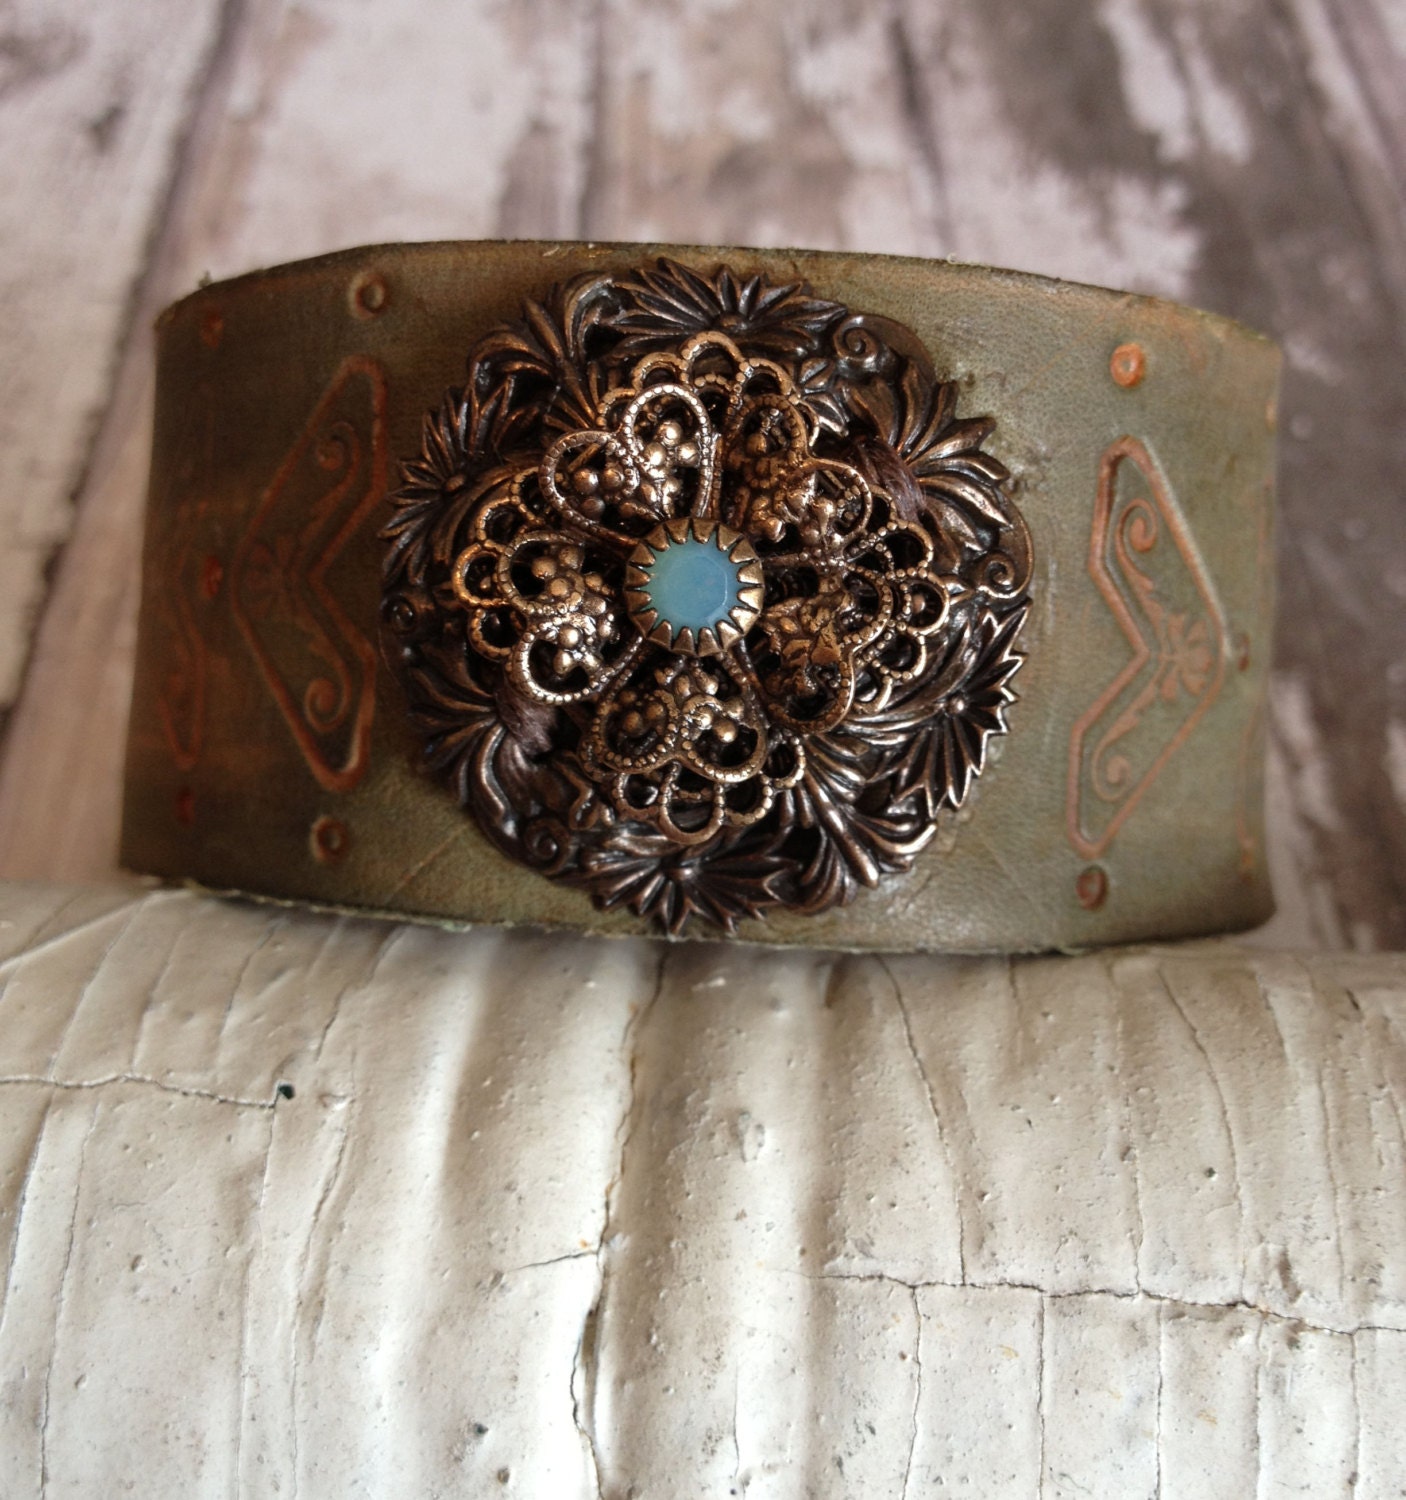 Antique Brass Filigree Leather Cuff by thoughtfulart on Etsy